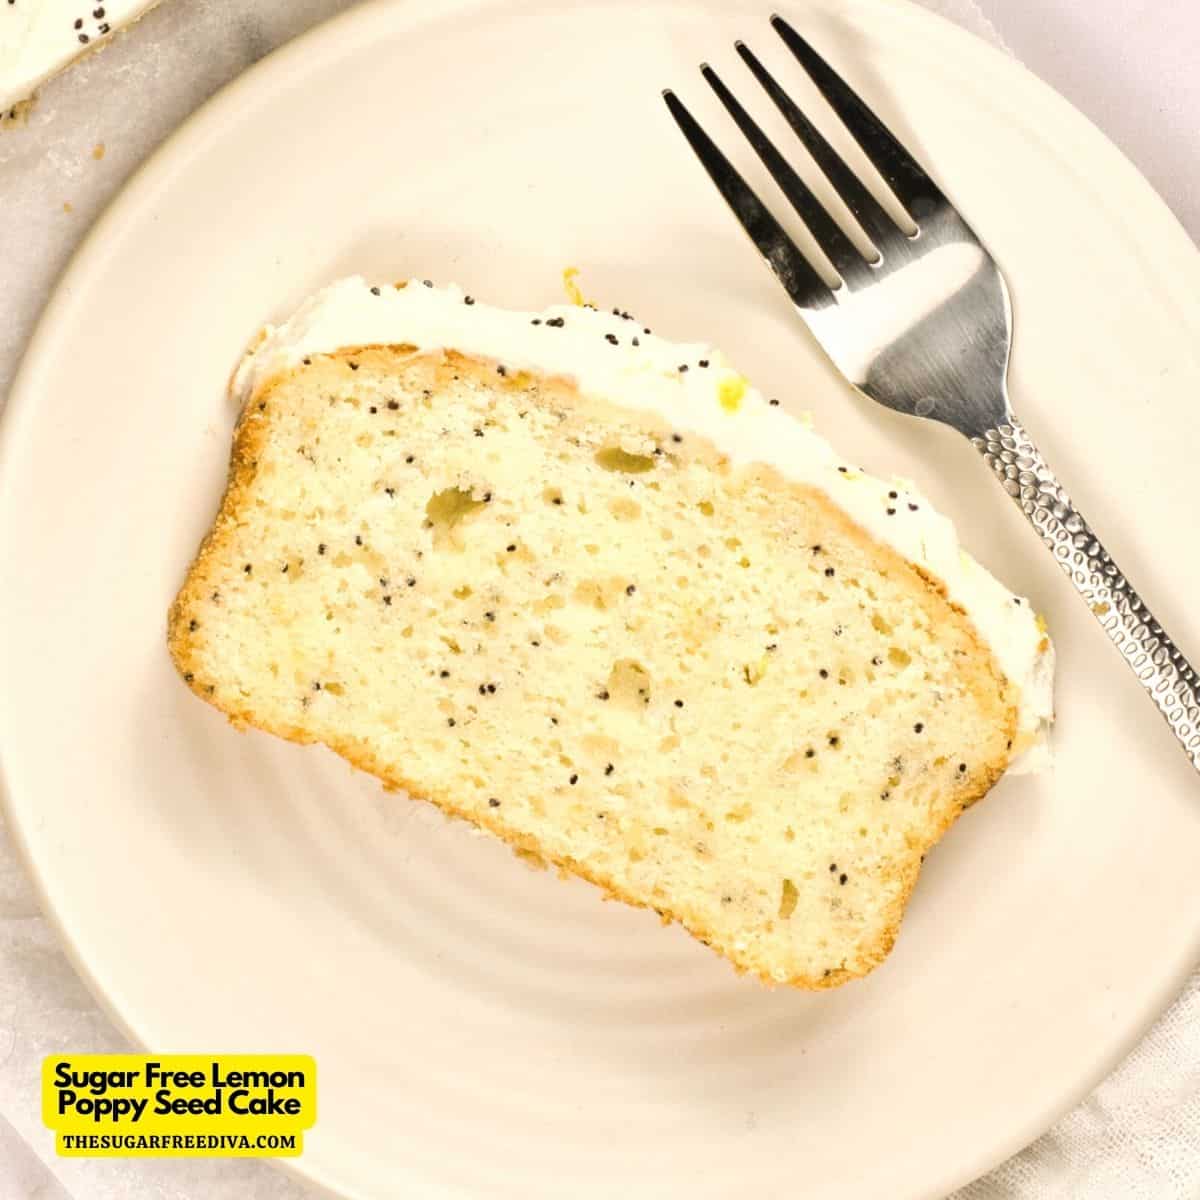 Sugar Free Lemon Poppy Seed Cake, a simple and flavorful dessert recipe made with fresh lemon juice and no added sugar.